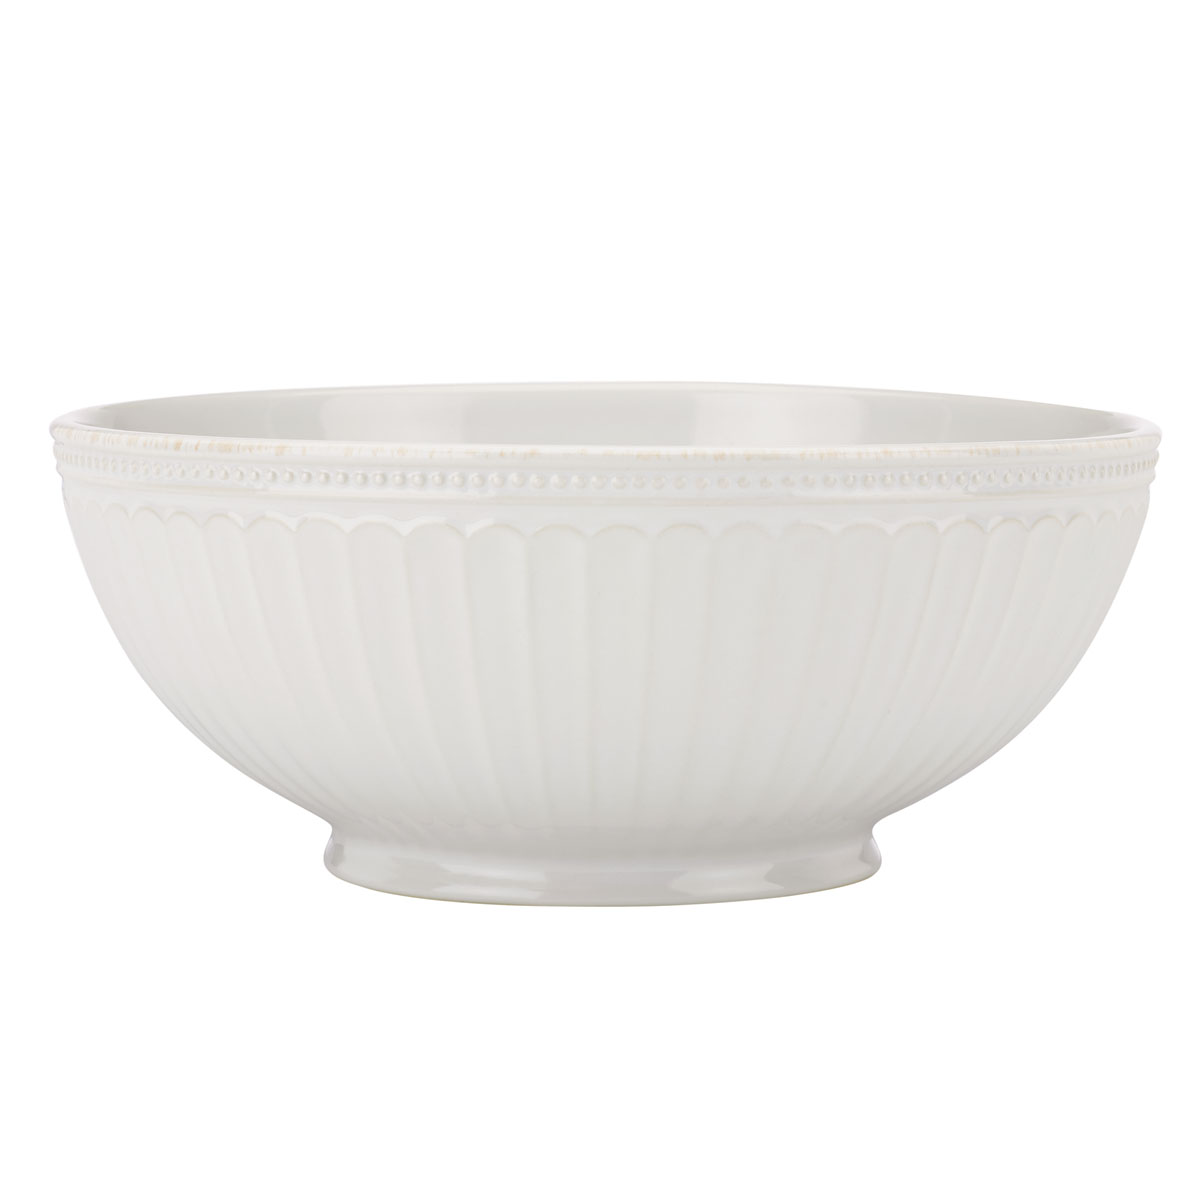 Lenox French Perle Groove White China Serving Bowl, Single